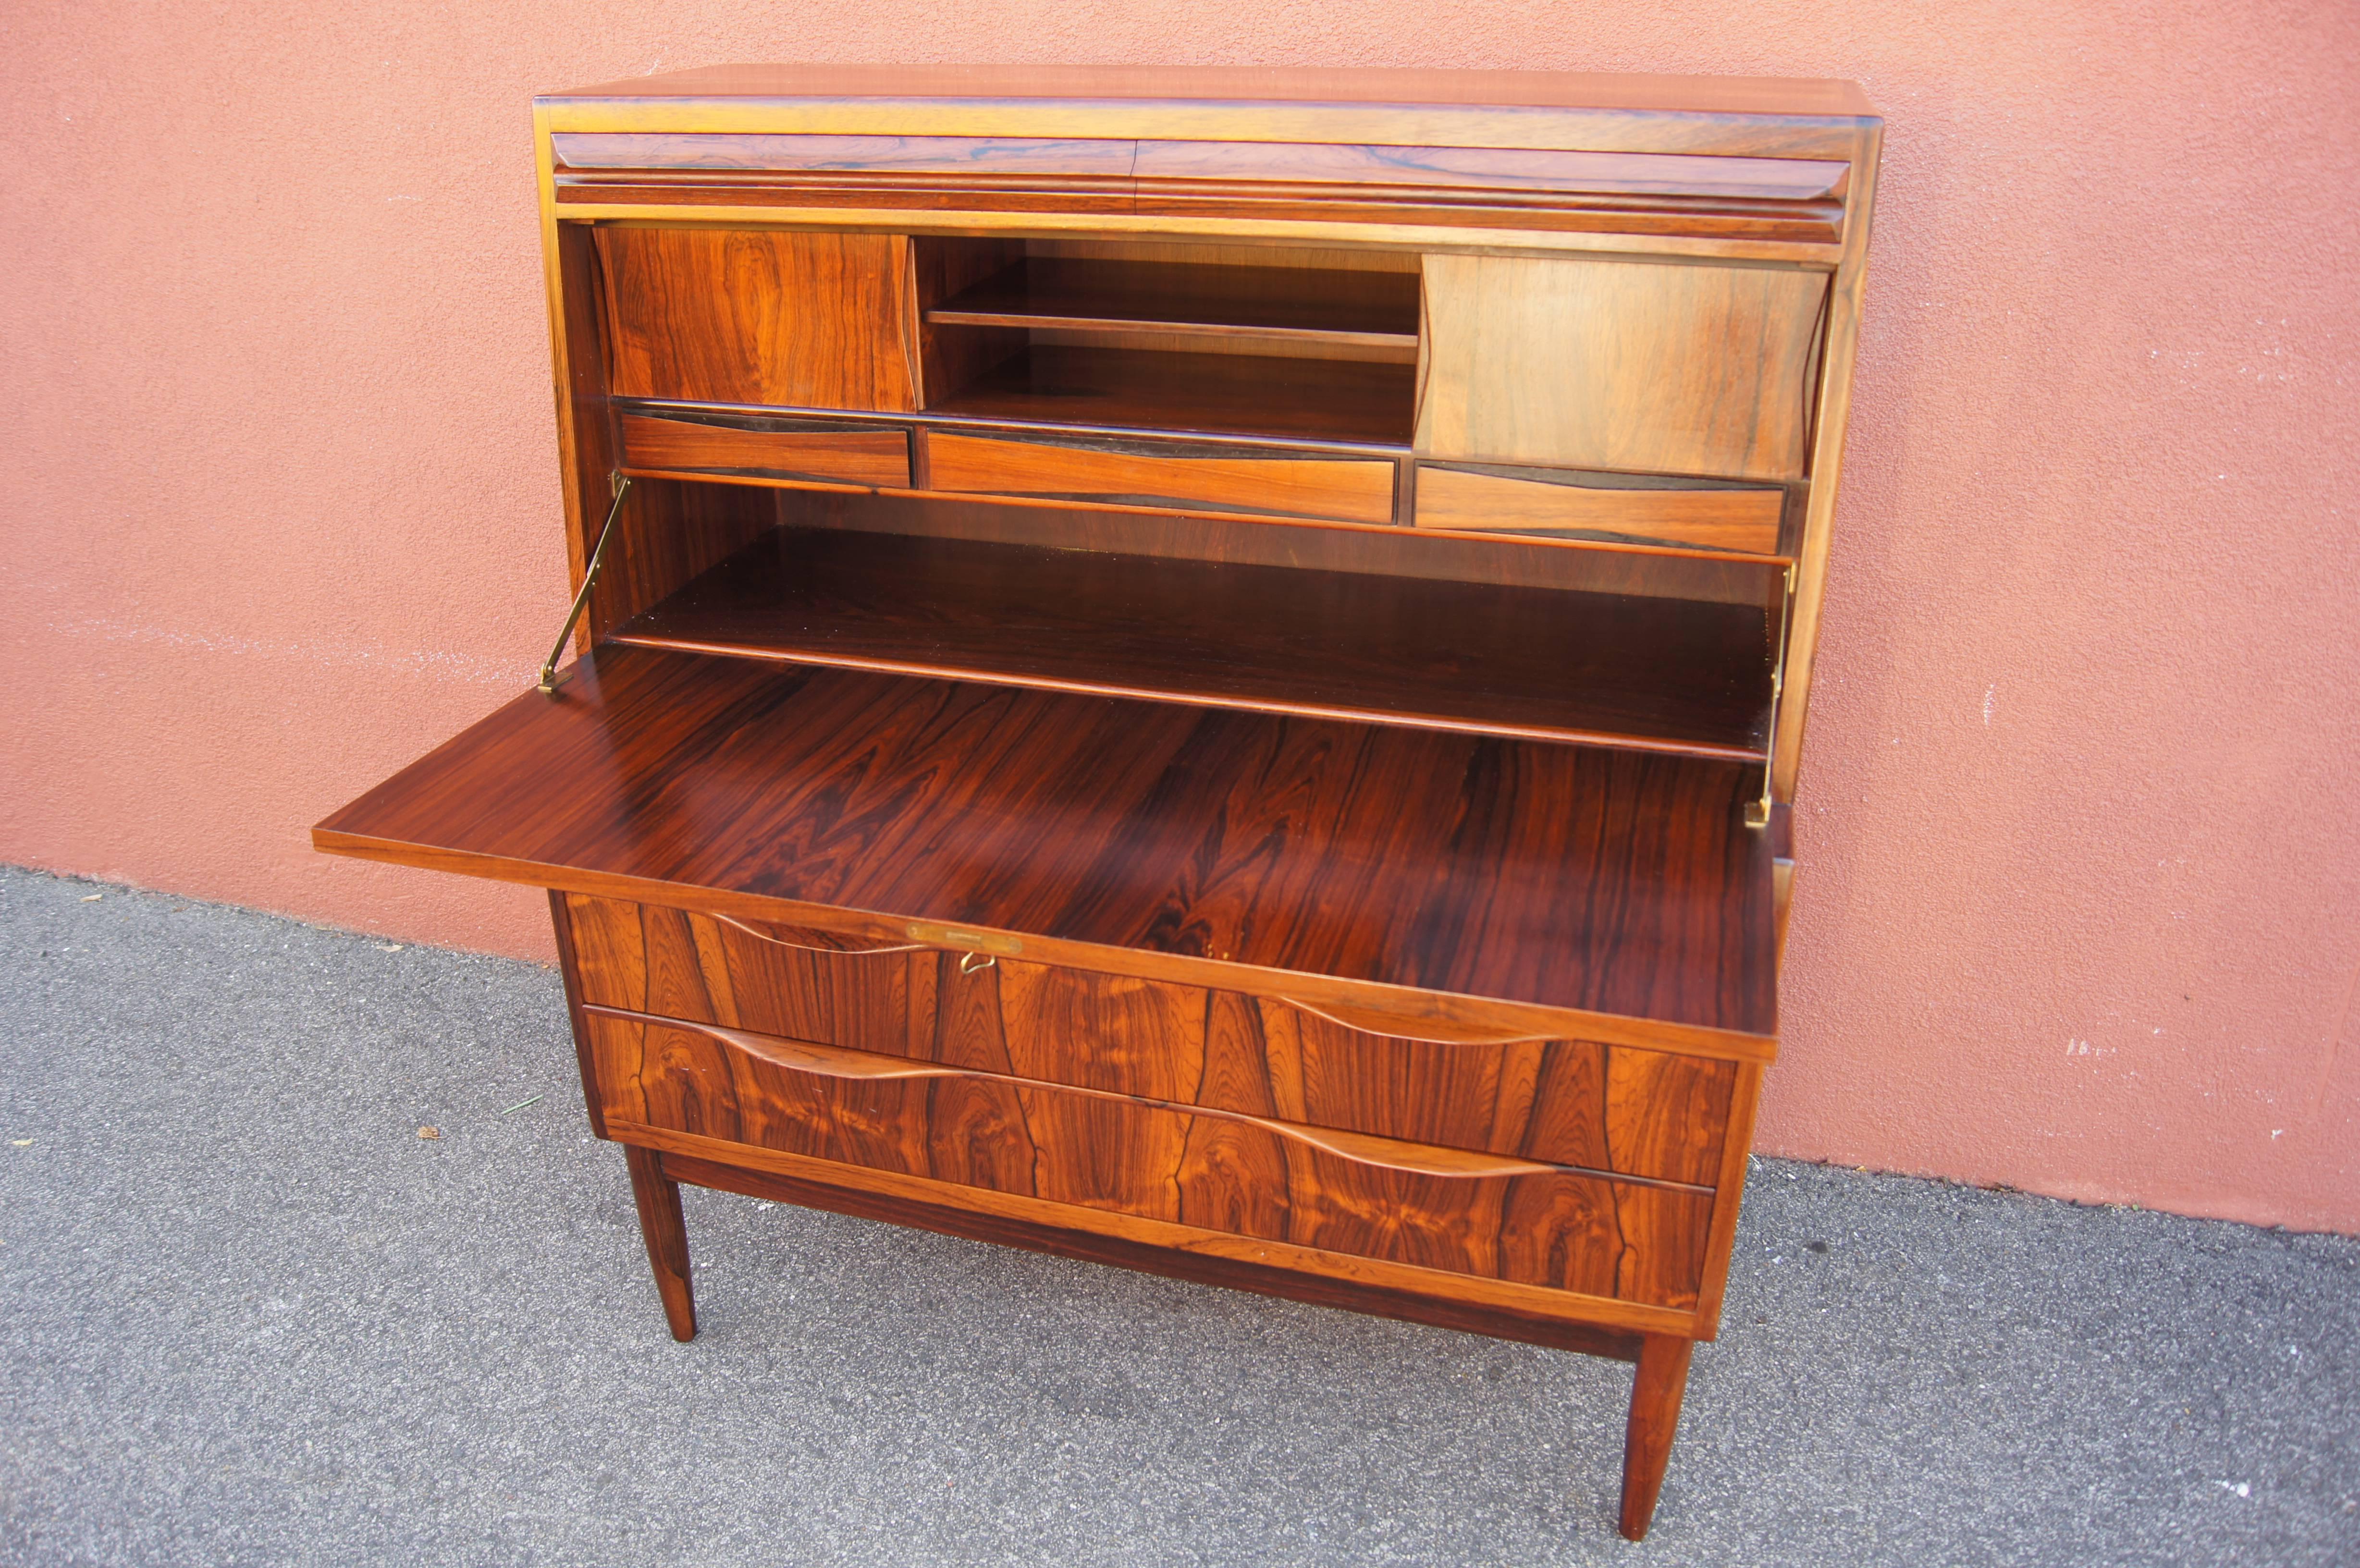 Designed by Ib Kofod-Larsen, this Danish modern secretary desk has been crafted from rosewood with beautifully matched grains. The locking desktop folds down, revealing a wide shelf, three drawers with bowtie fronts, and three small cubby spaces